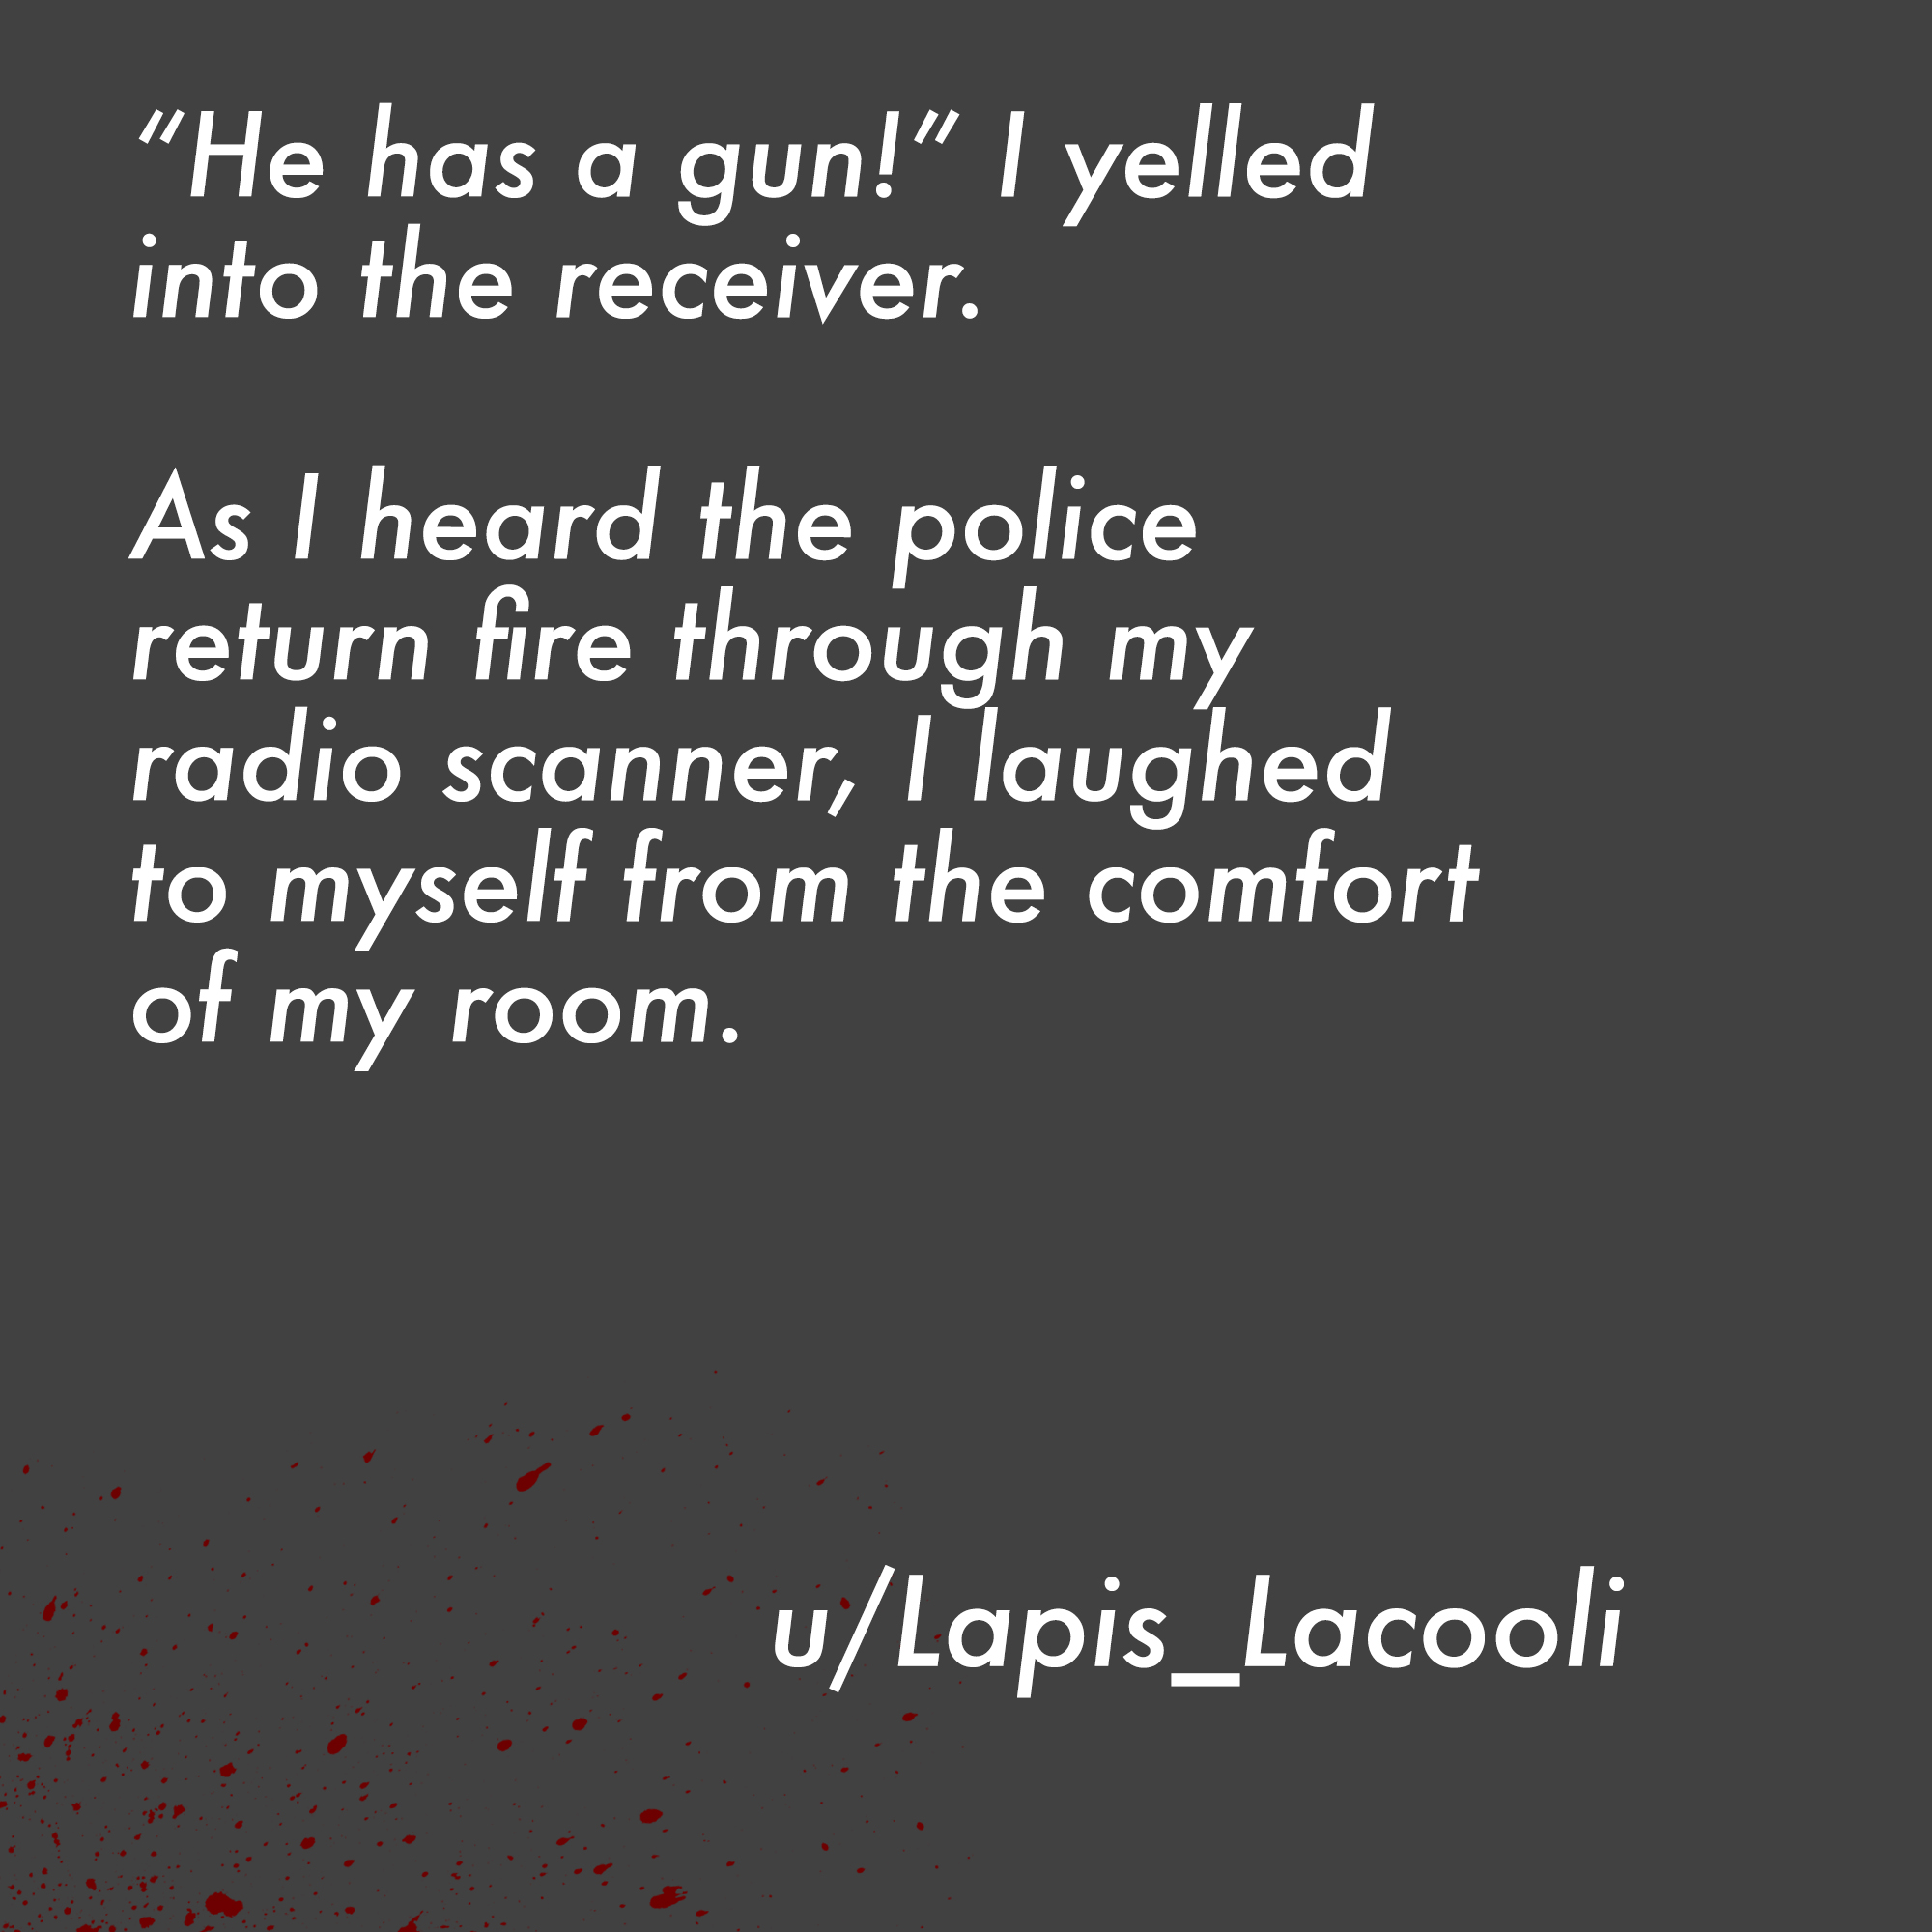 two line horror stories - radio shack ad - "He has a gun!" I yelled into the receiver. As I heard the police return fire through my radio scanner, I laughed to myself from the comfort of my room. uLapis_Lacooli